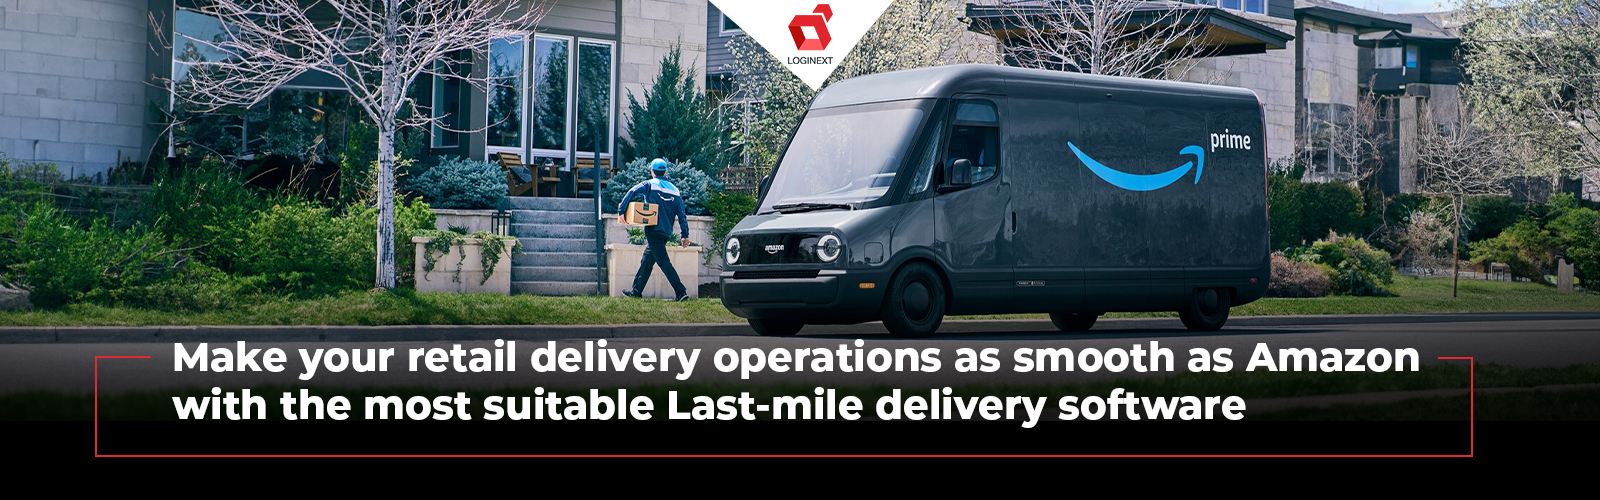 Top last-mile delivery software